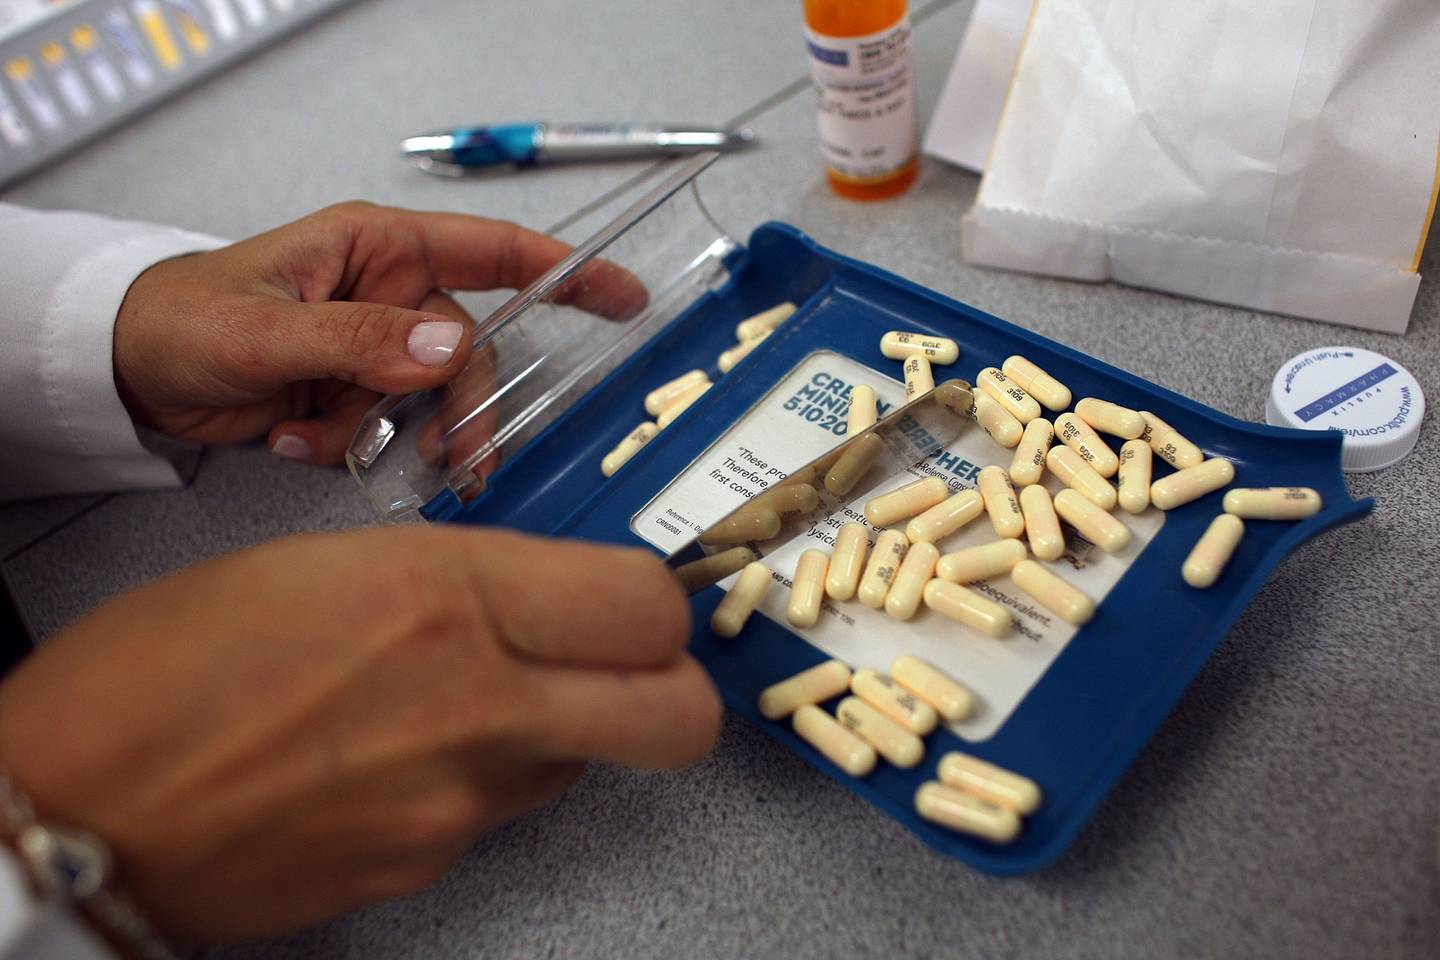 A pharmacist fills a prescription in this 2007 file photo.